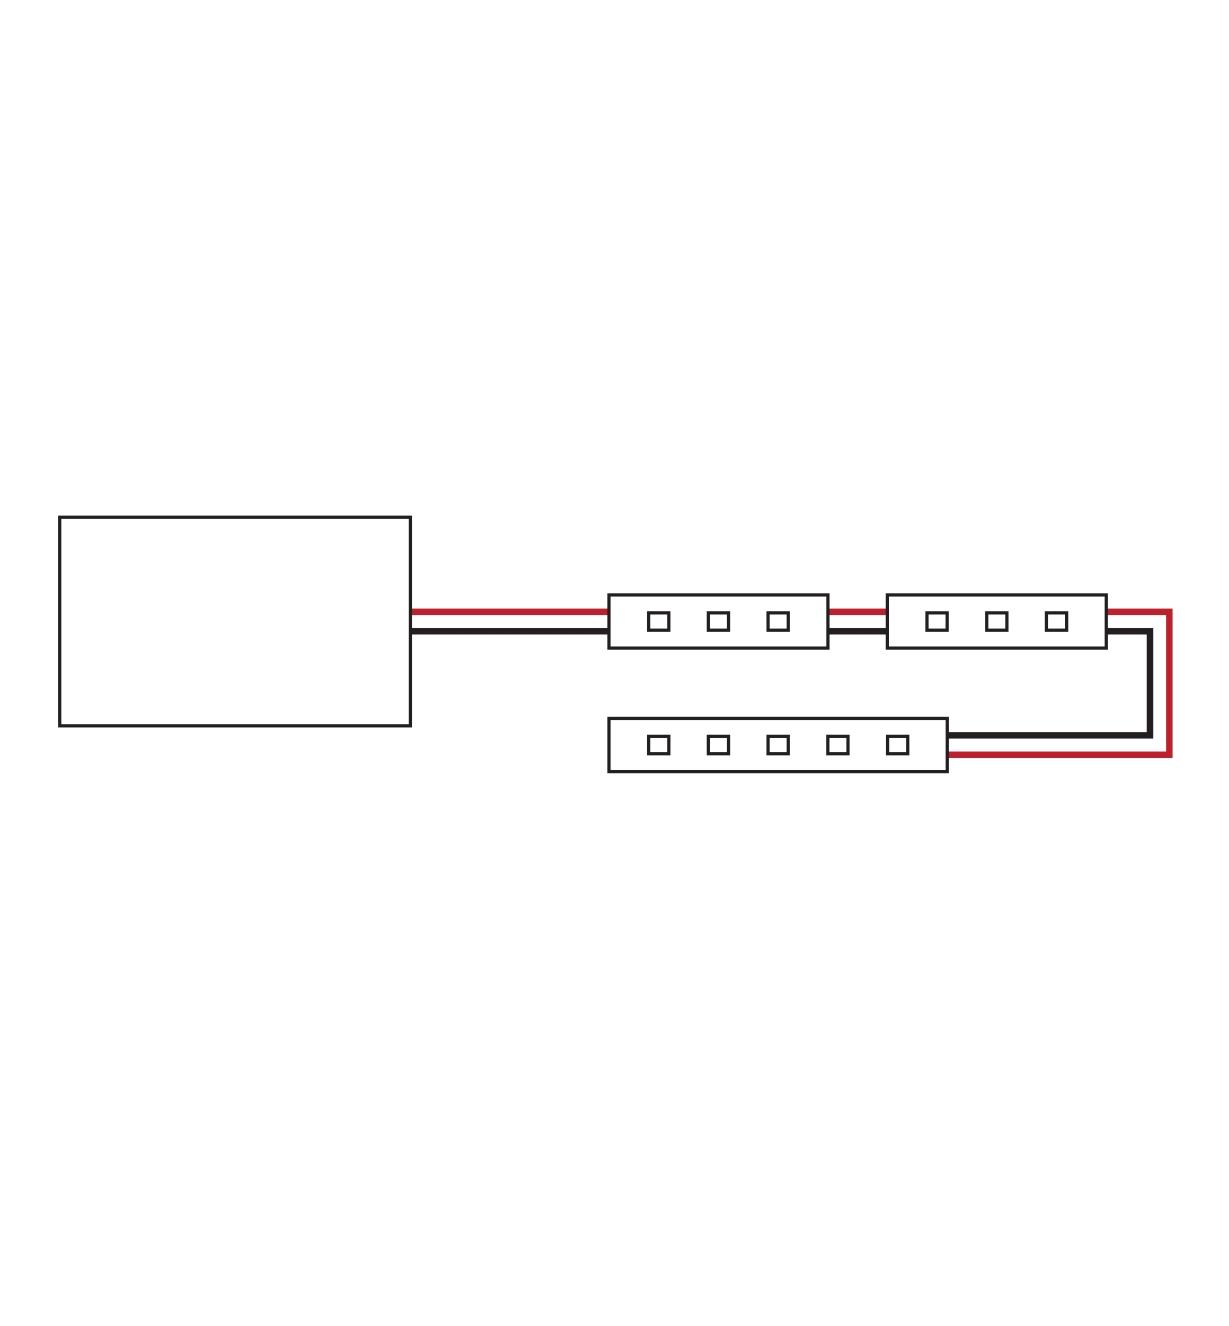 Diagram showing tape lights attached to power supply in a straight run configuration